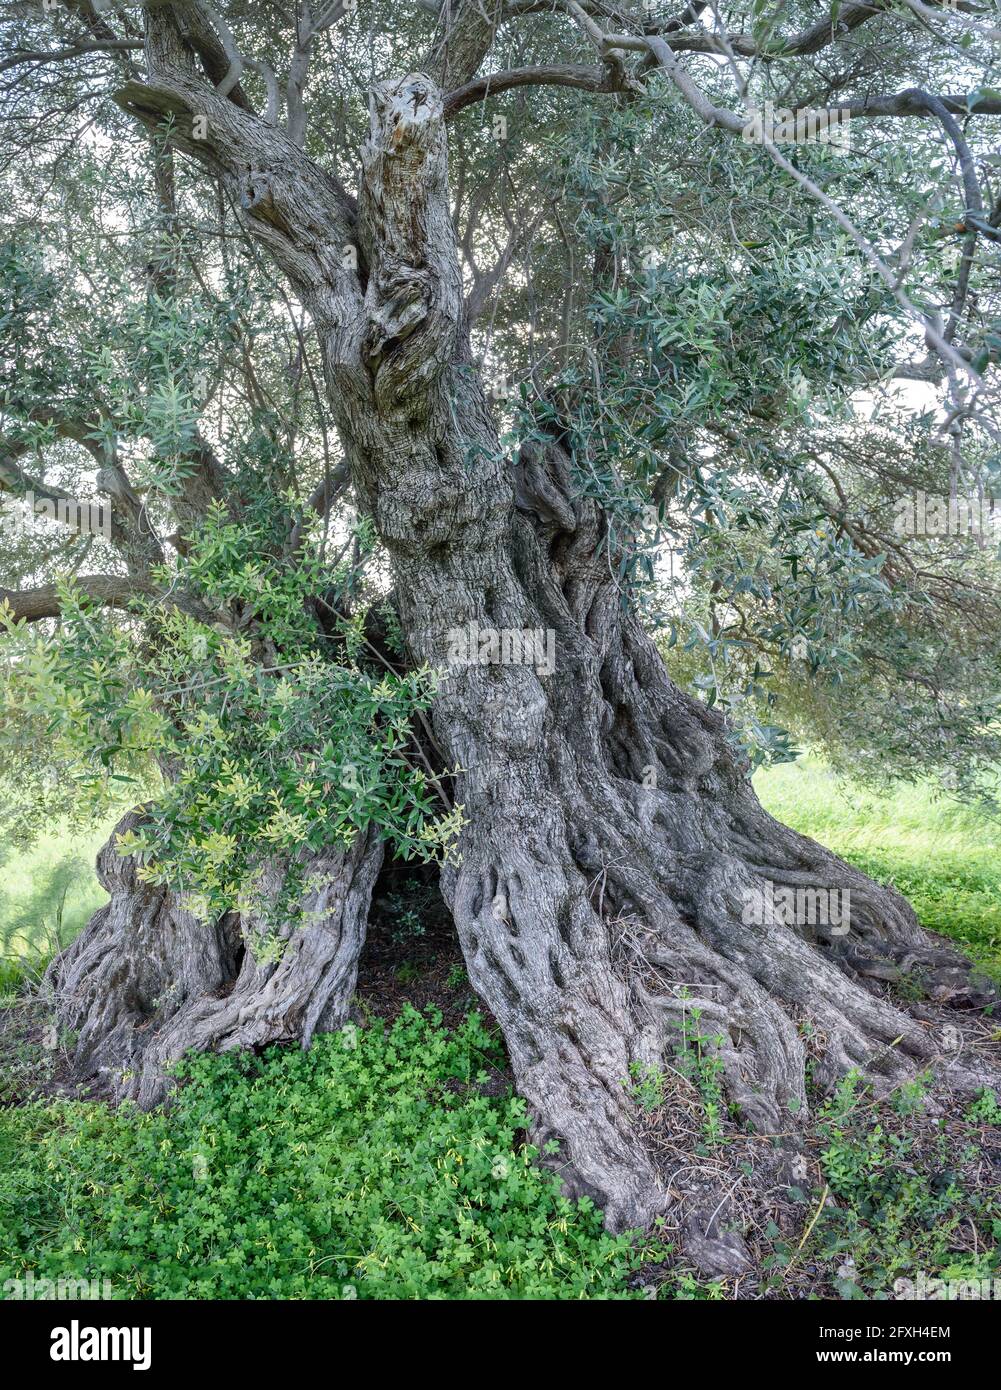 Ancient olive tree with hollow trunk and deformed bark Stock Photo